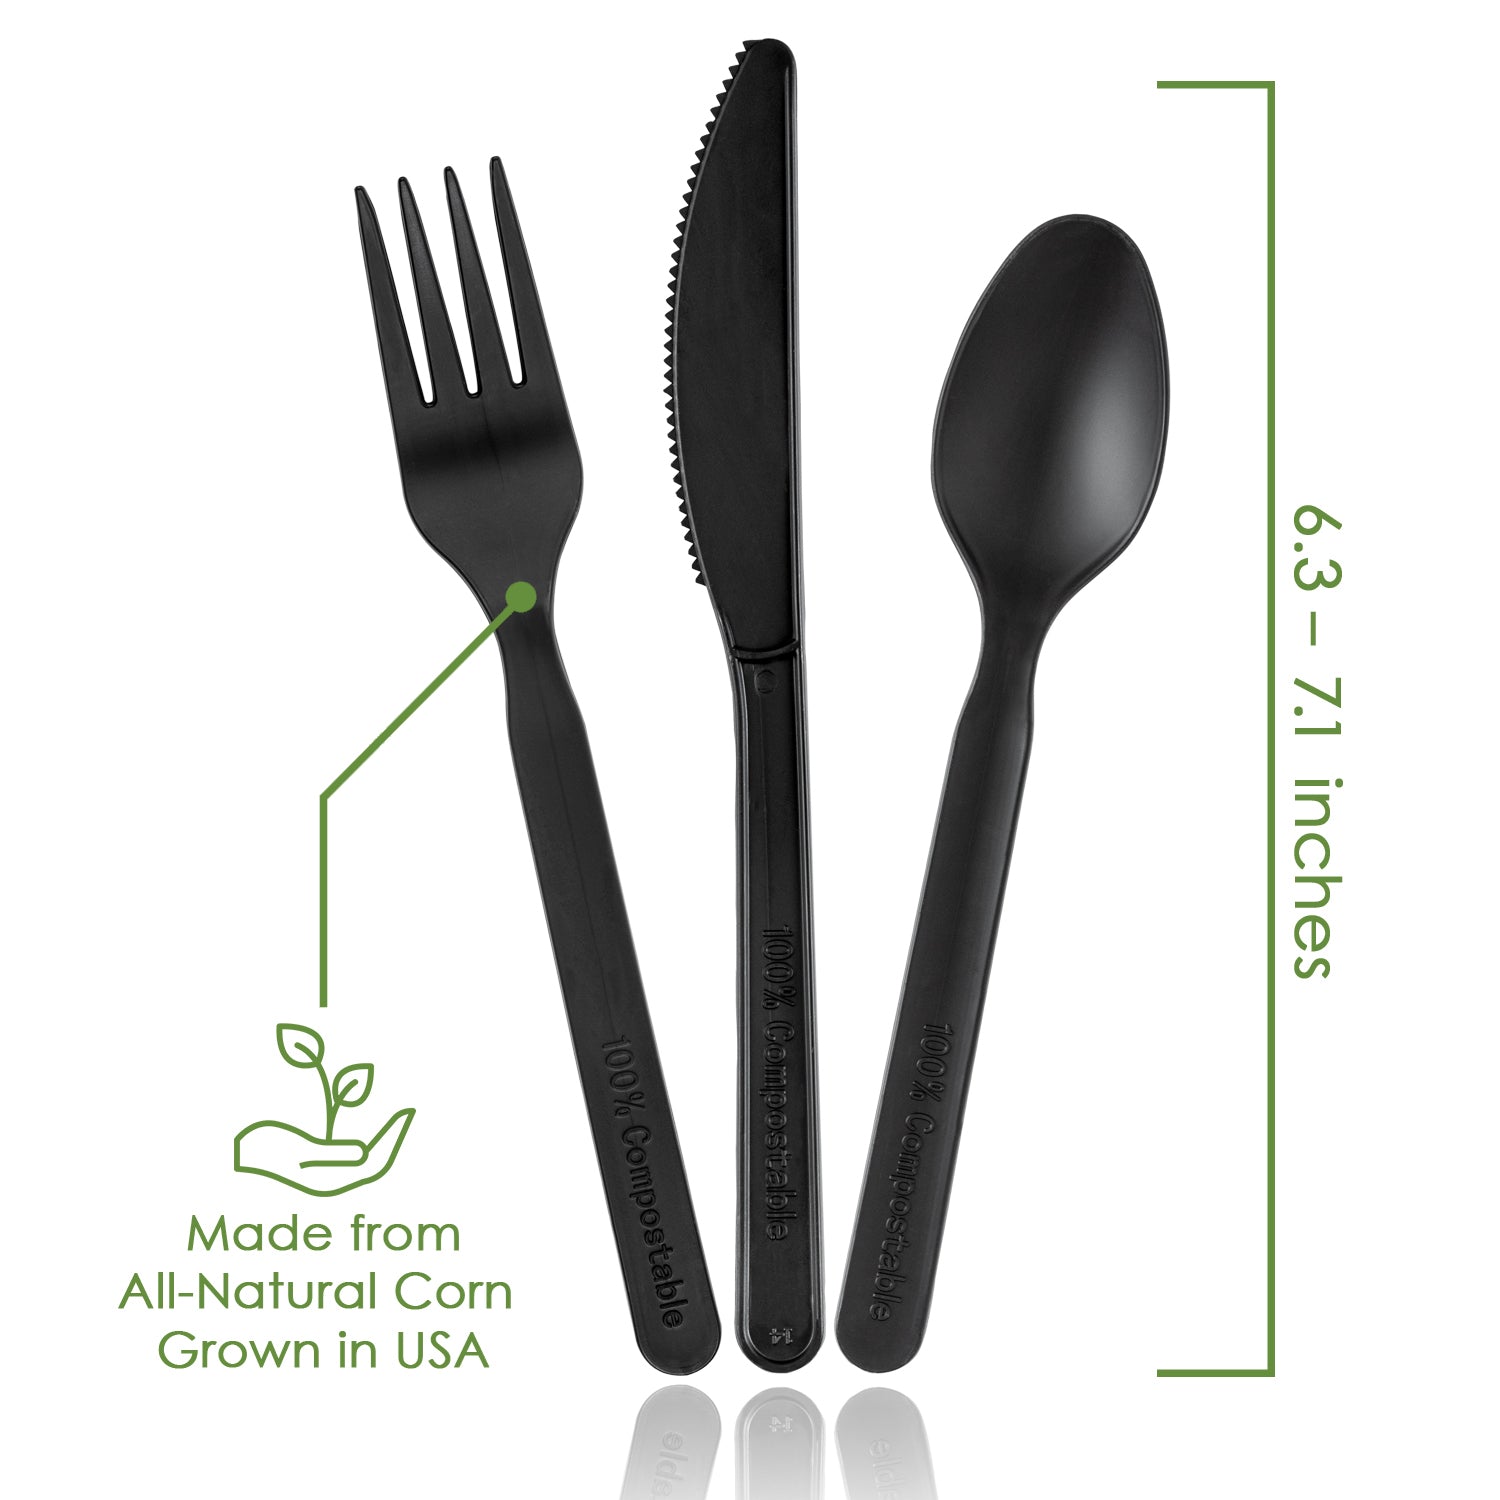 Compostable Disposable Dinnerware Set Includes Biodegradable Paper Plates  Forks Knives Spoons (250 PCS) – DNET-ECO COMPANY LIMITED